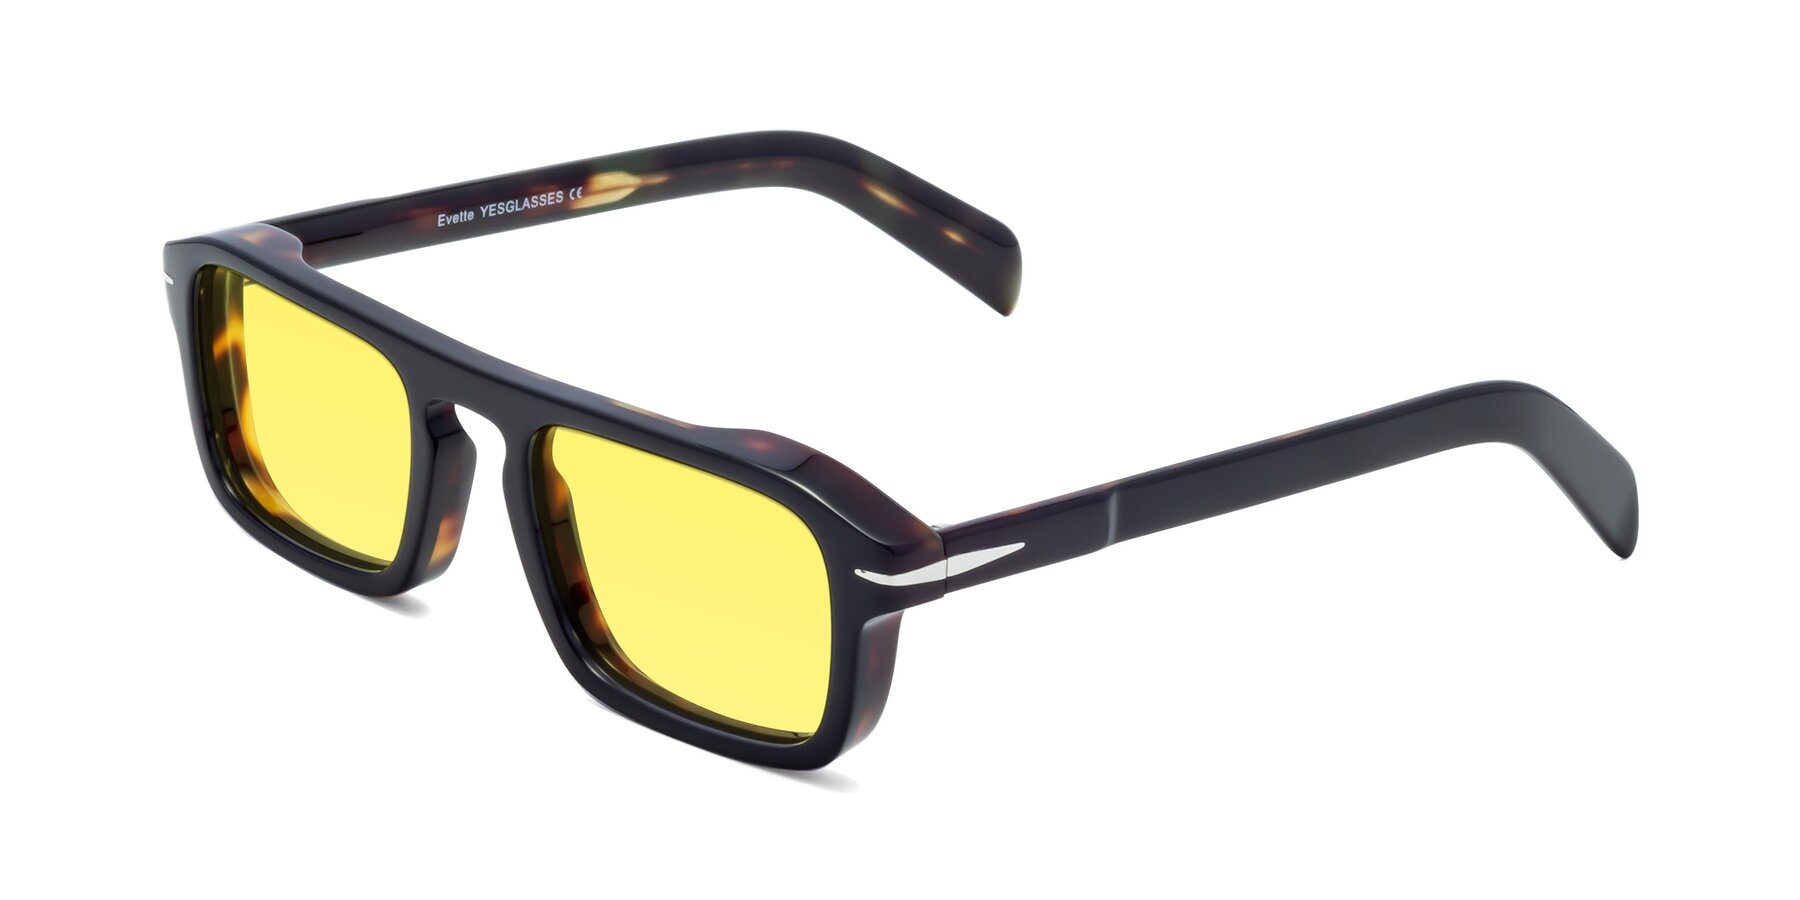 Angle of Evette in Black-Tortoise with Medium Yellow Tinted Lenses